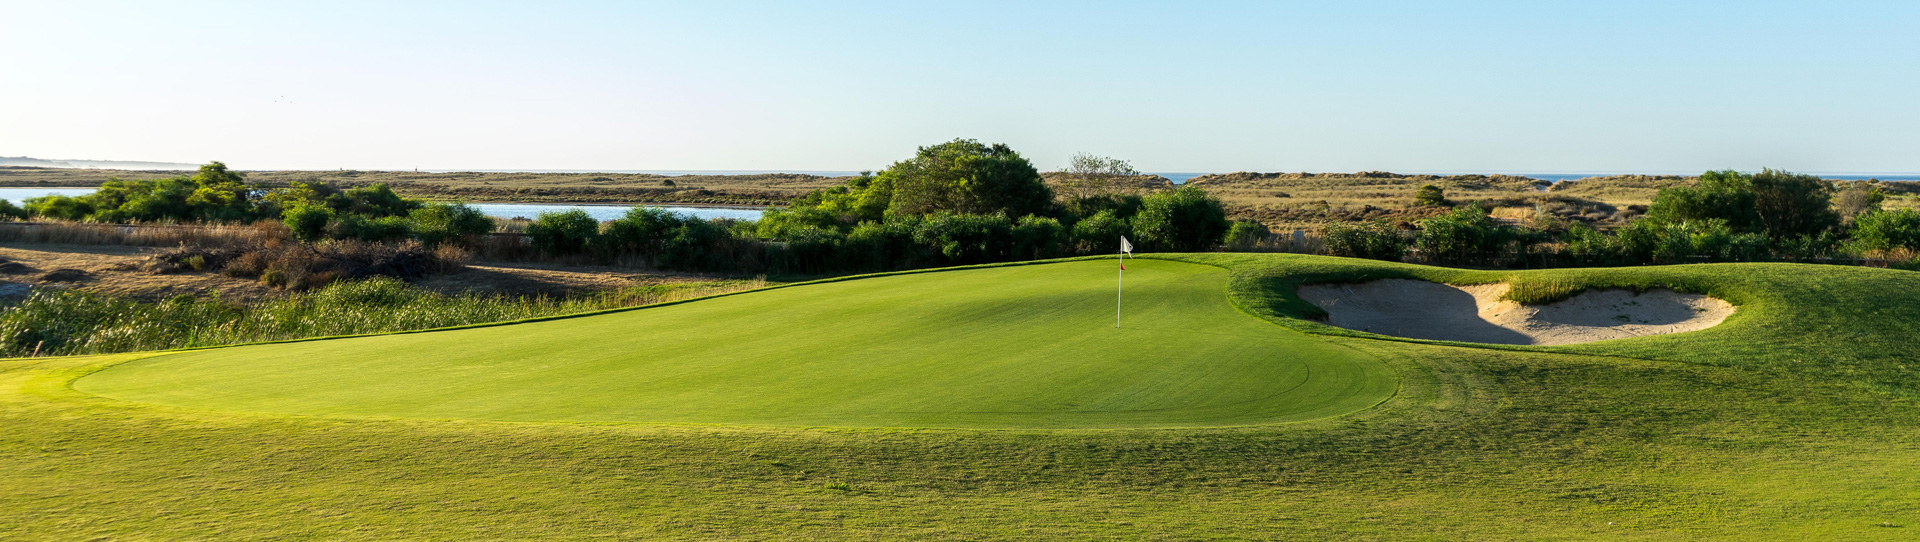 Portugal golf holidays - Palmares Quintuplet Experience - Photo 2